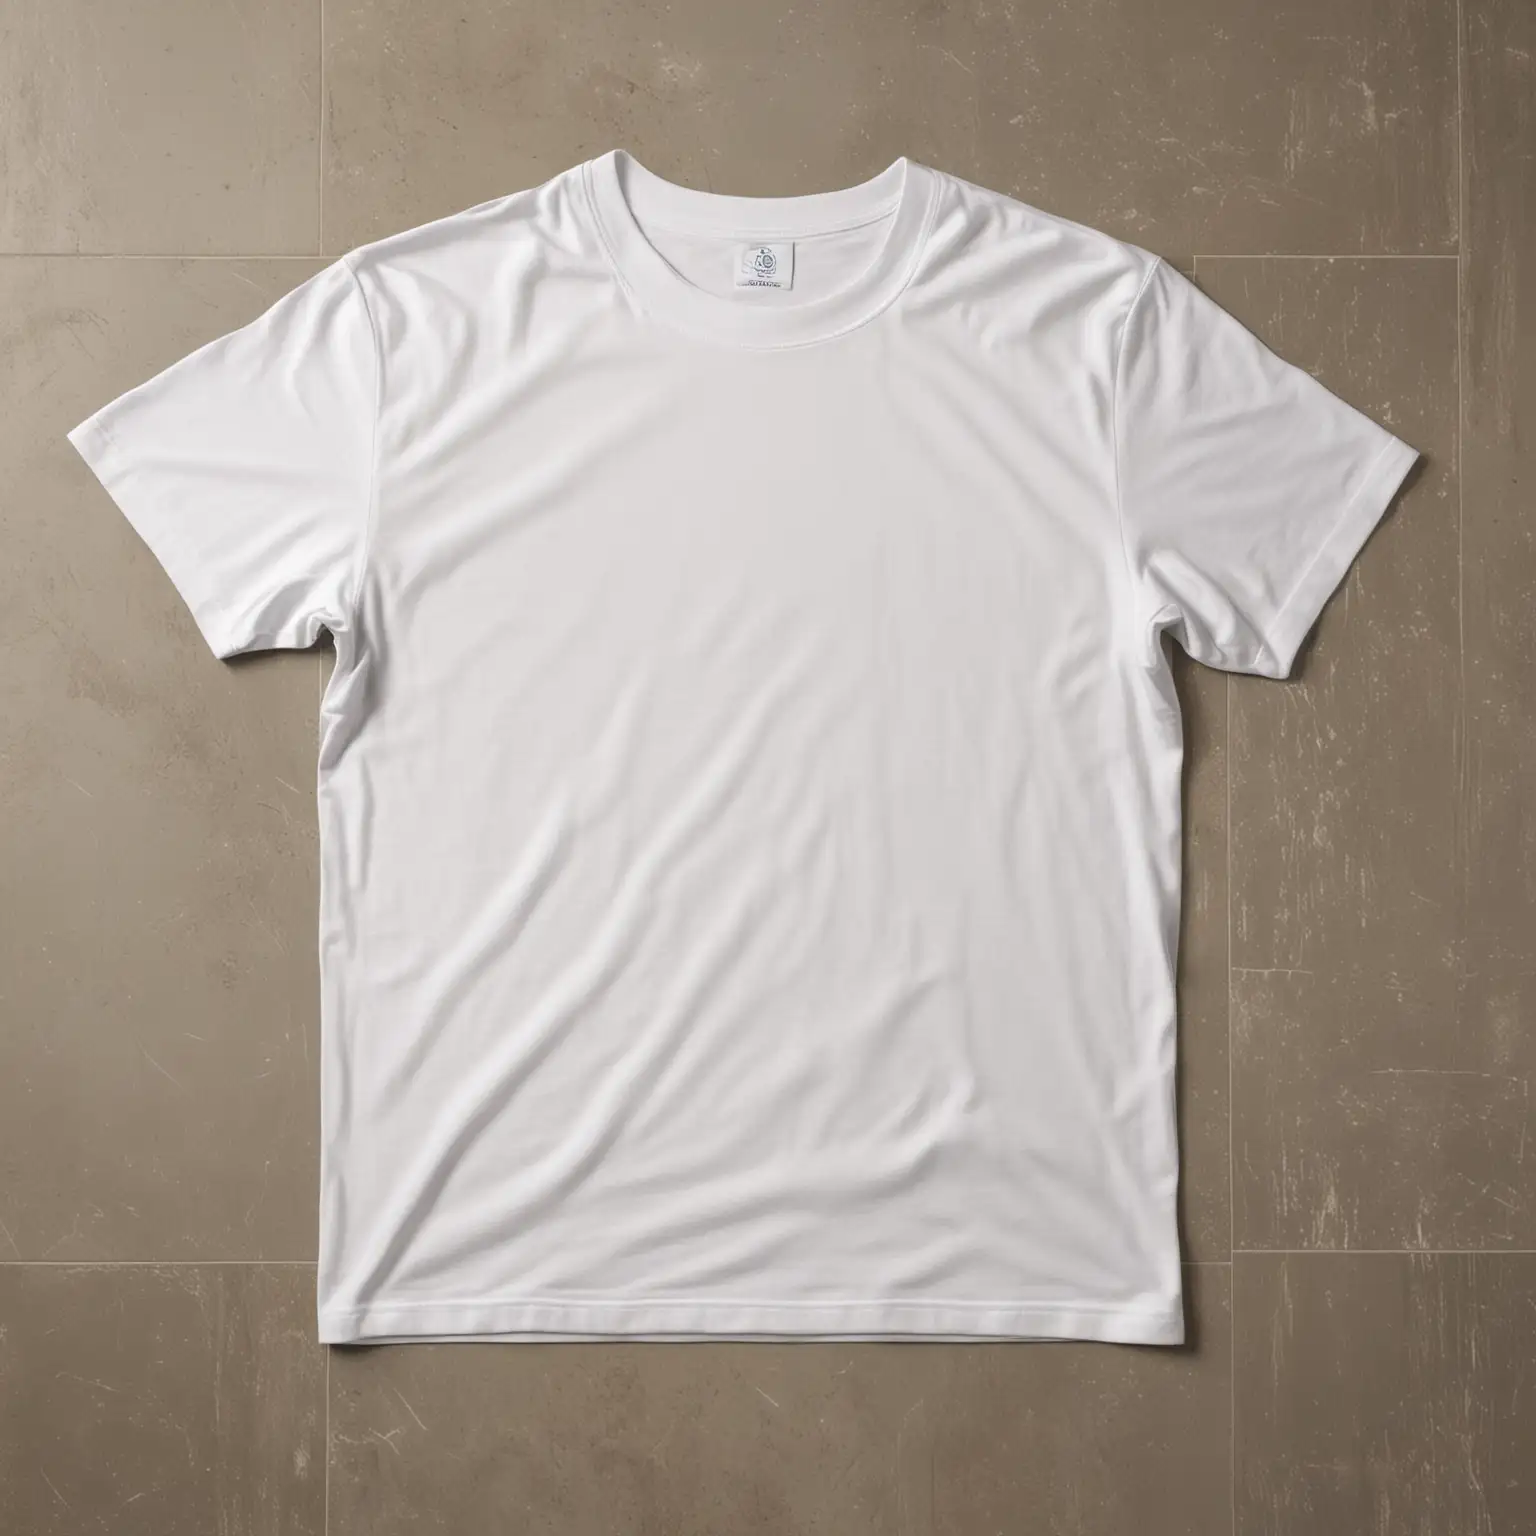 White Cotton TShirt on Floor with Solid Background